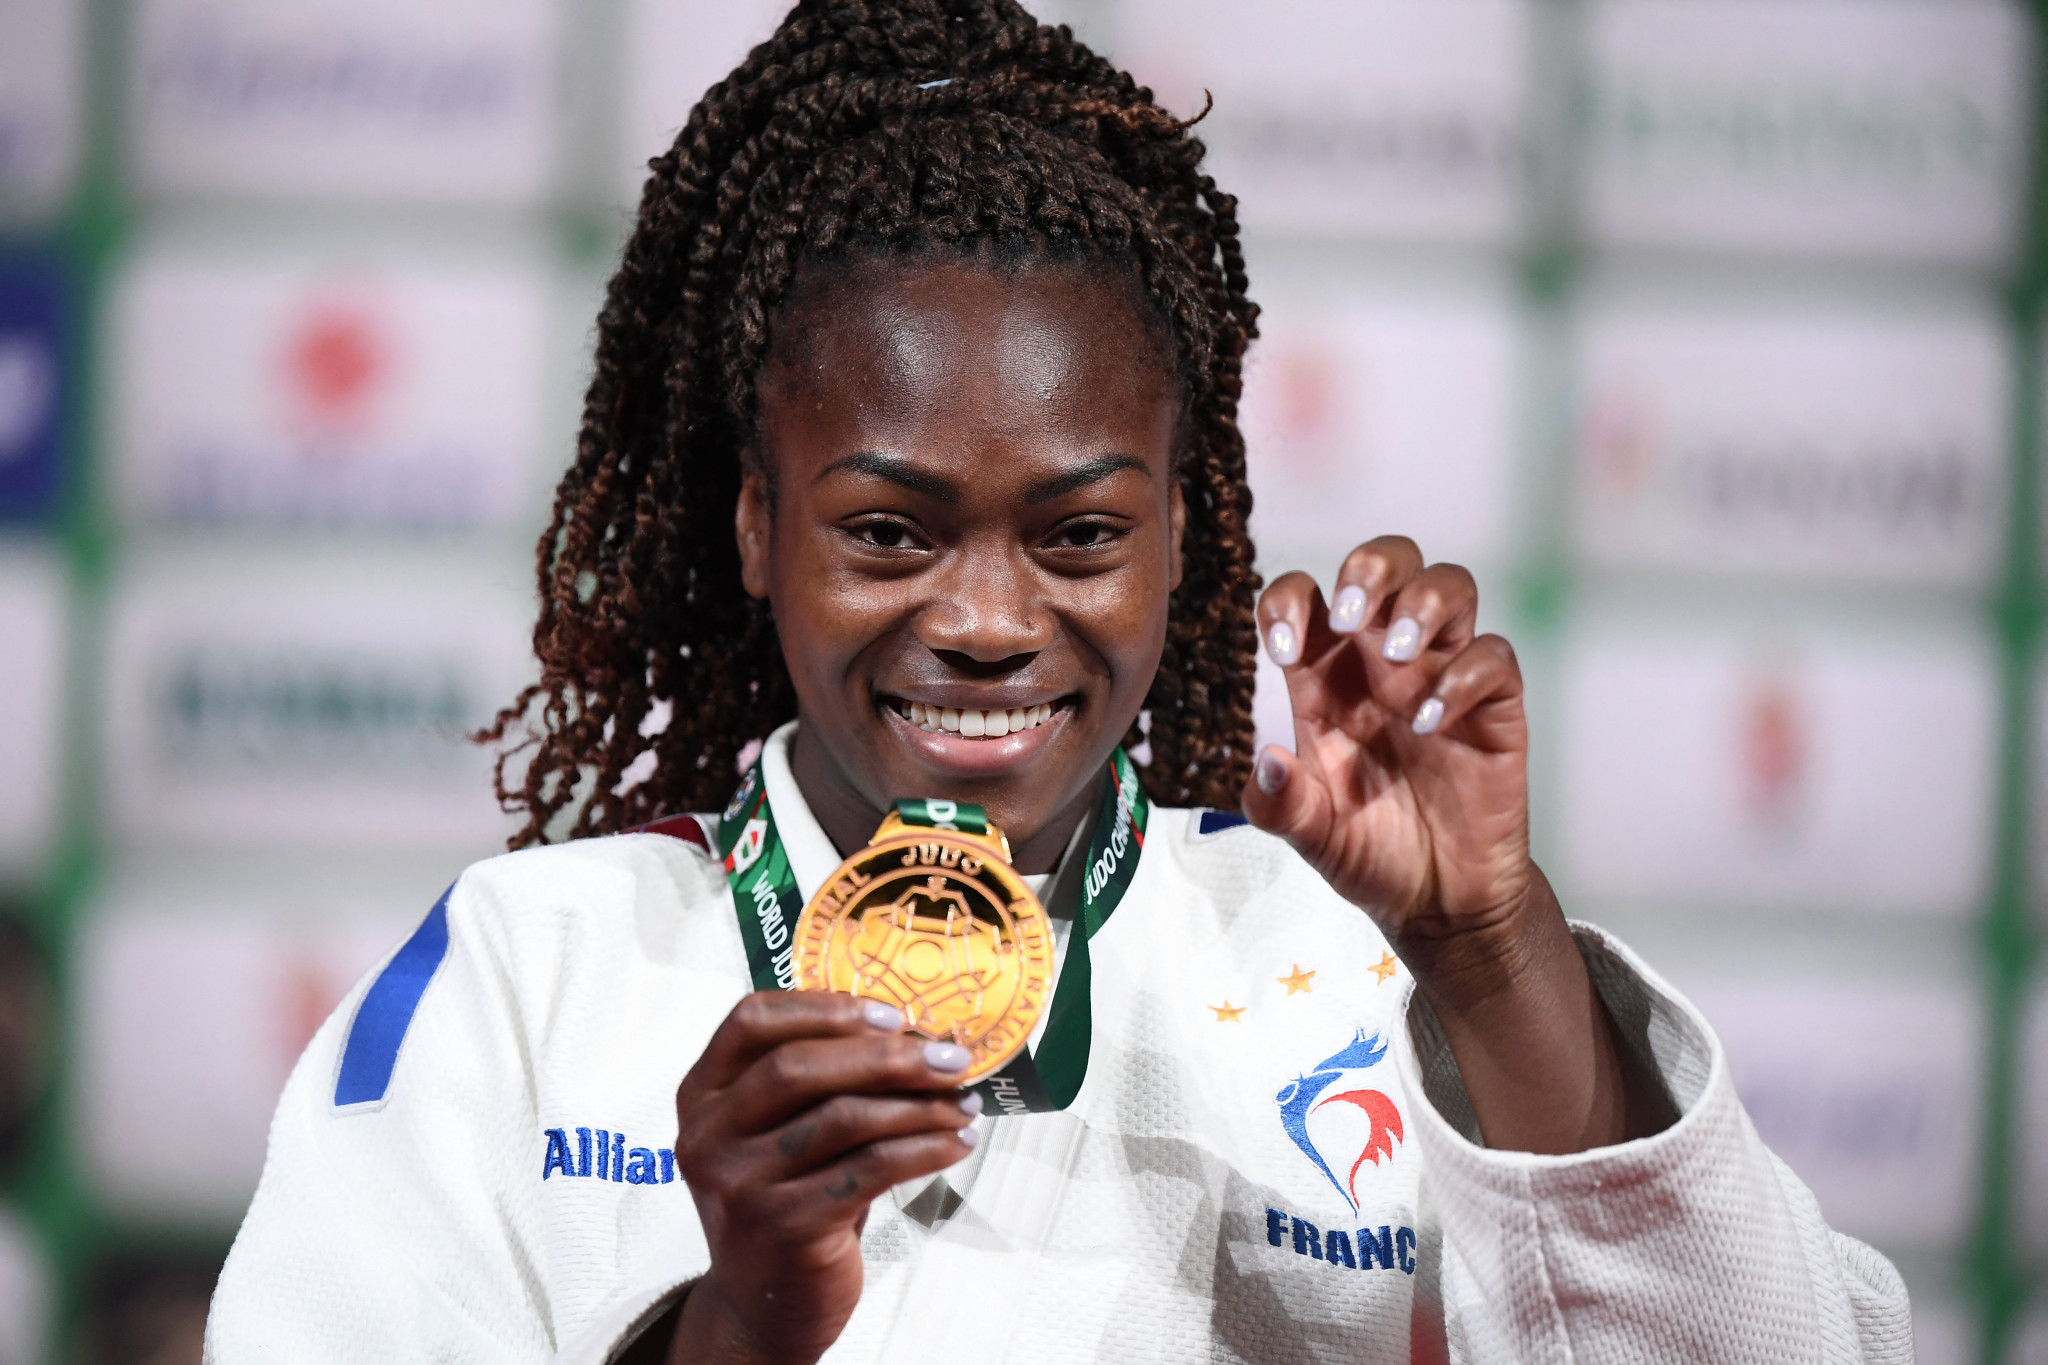 France's Clarisse Agbegnenou is now five-time European and five-time world champion, and won the Best European Female Judoka award for 2019 and 2020 ©Getty Images